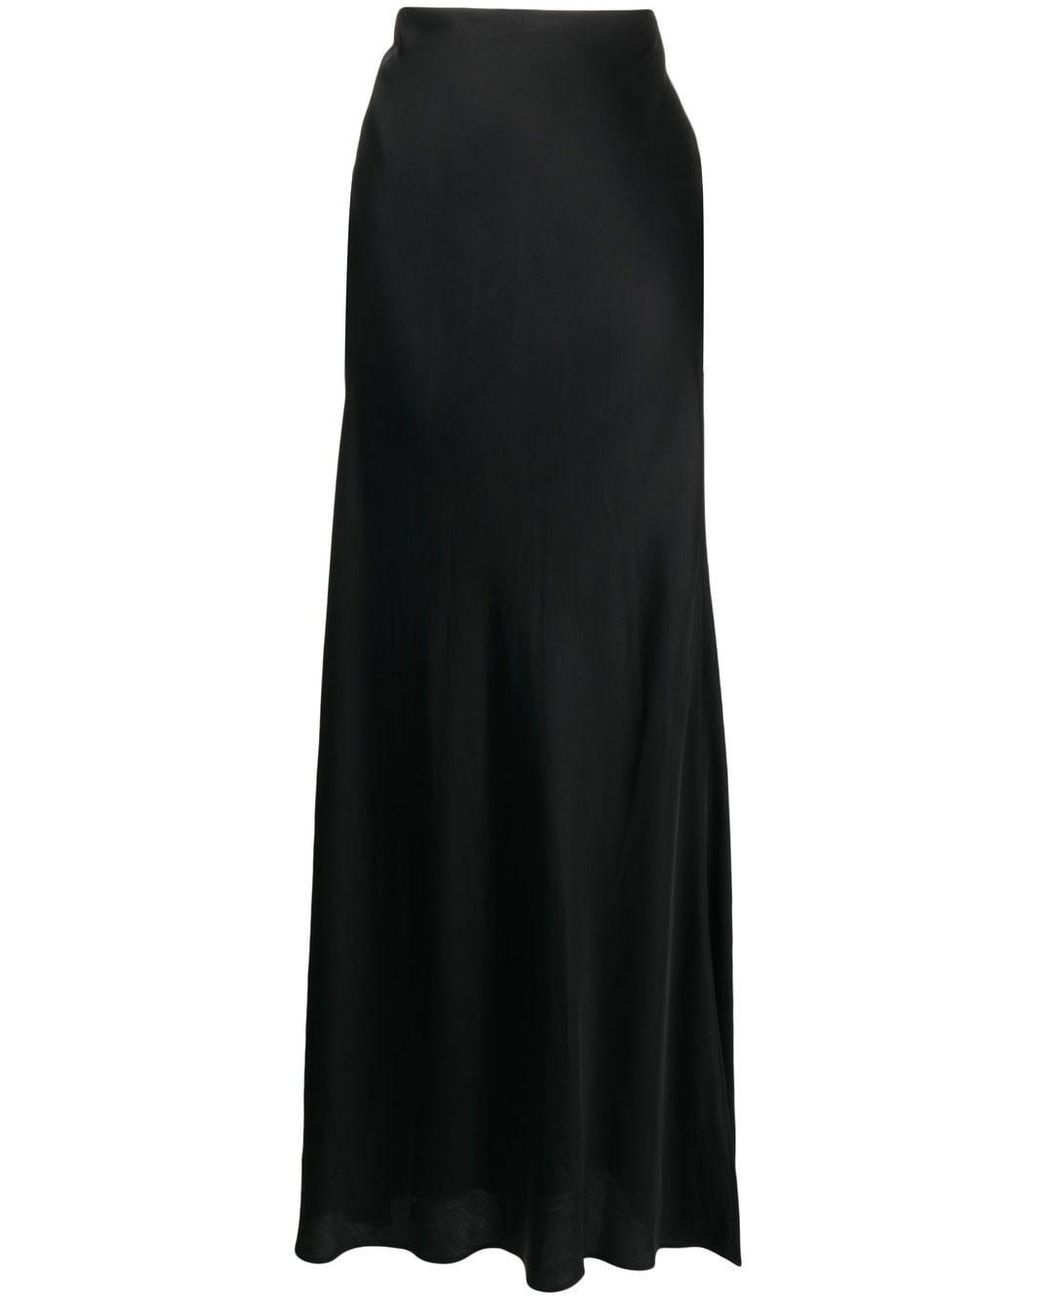 L'Agence A-line Maxi Skirt in Black | Lyst